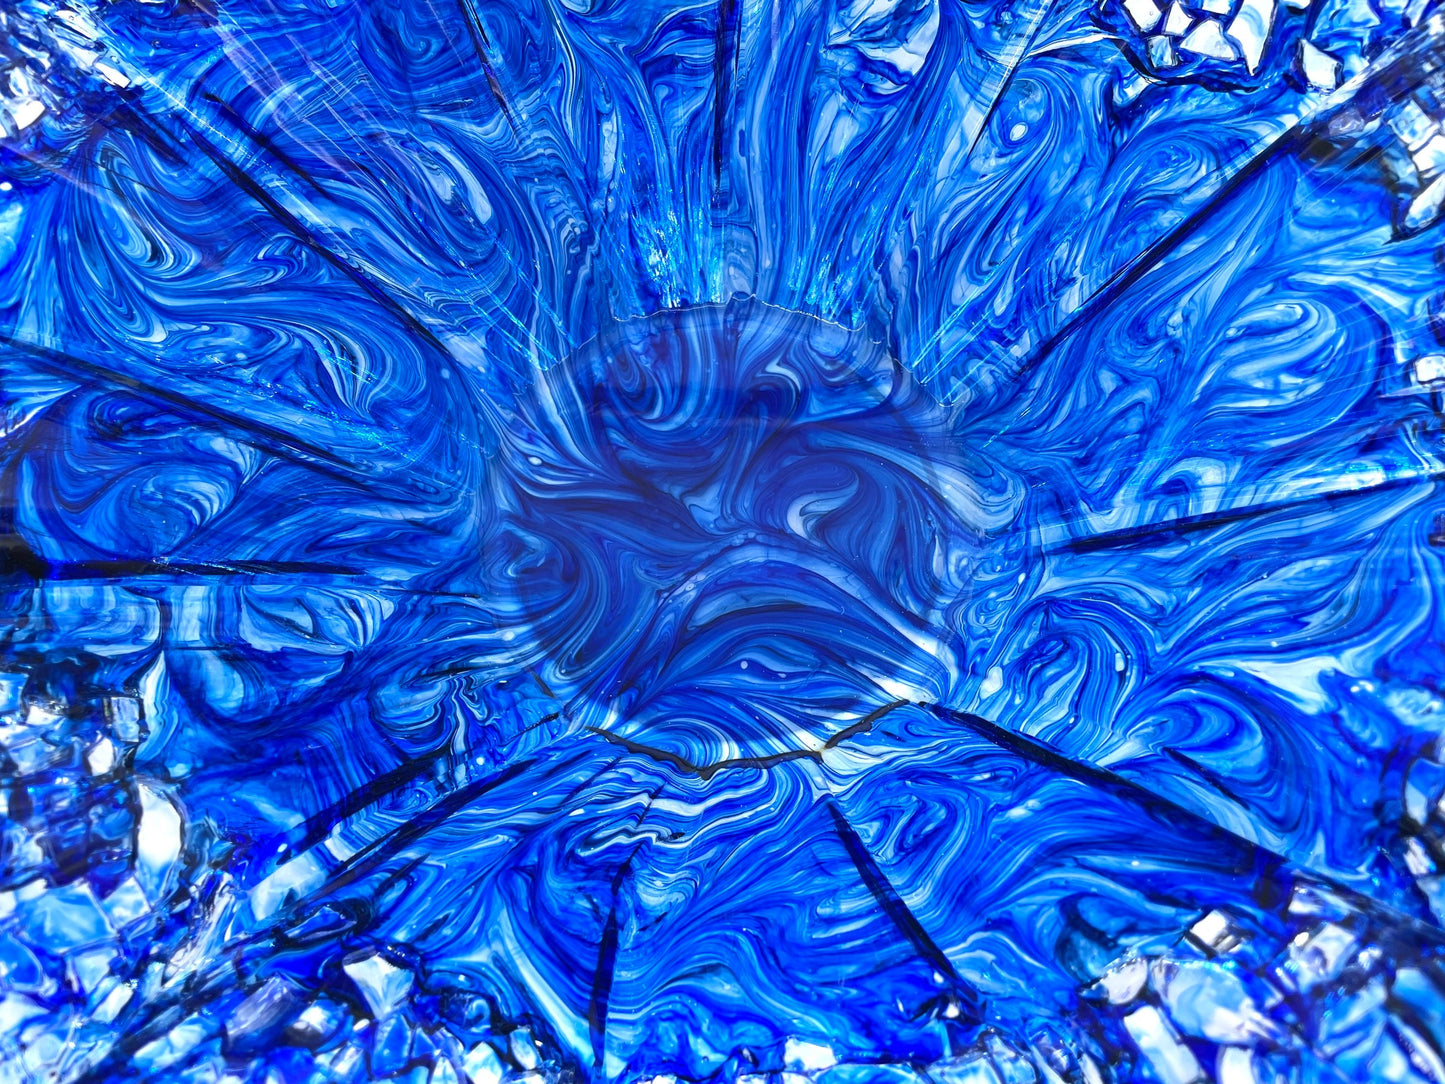 Sapphire Blue Resin and Glass Decorative Bowl Free Form MADE TO ORDER